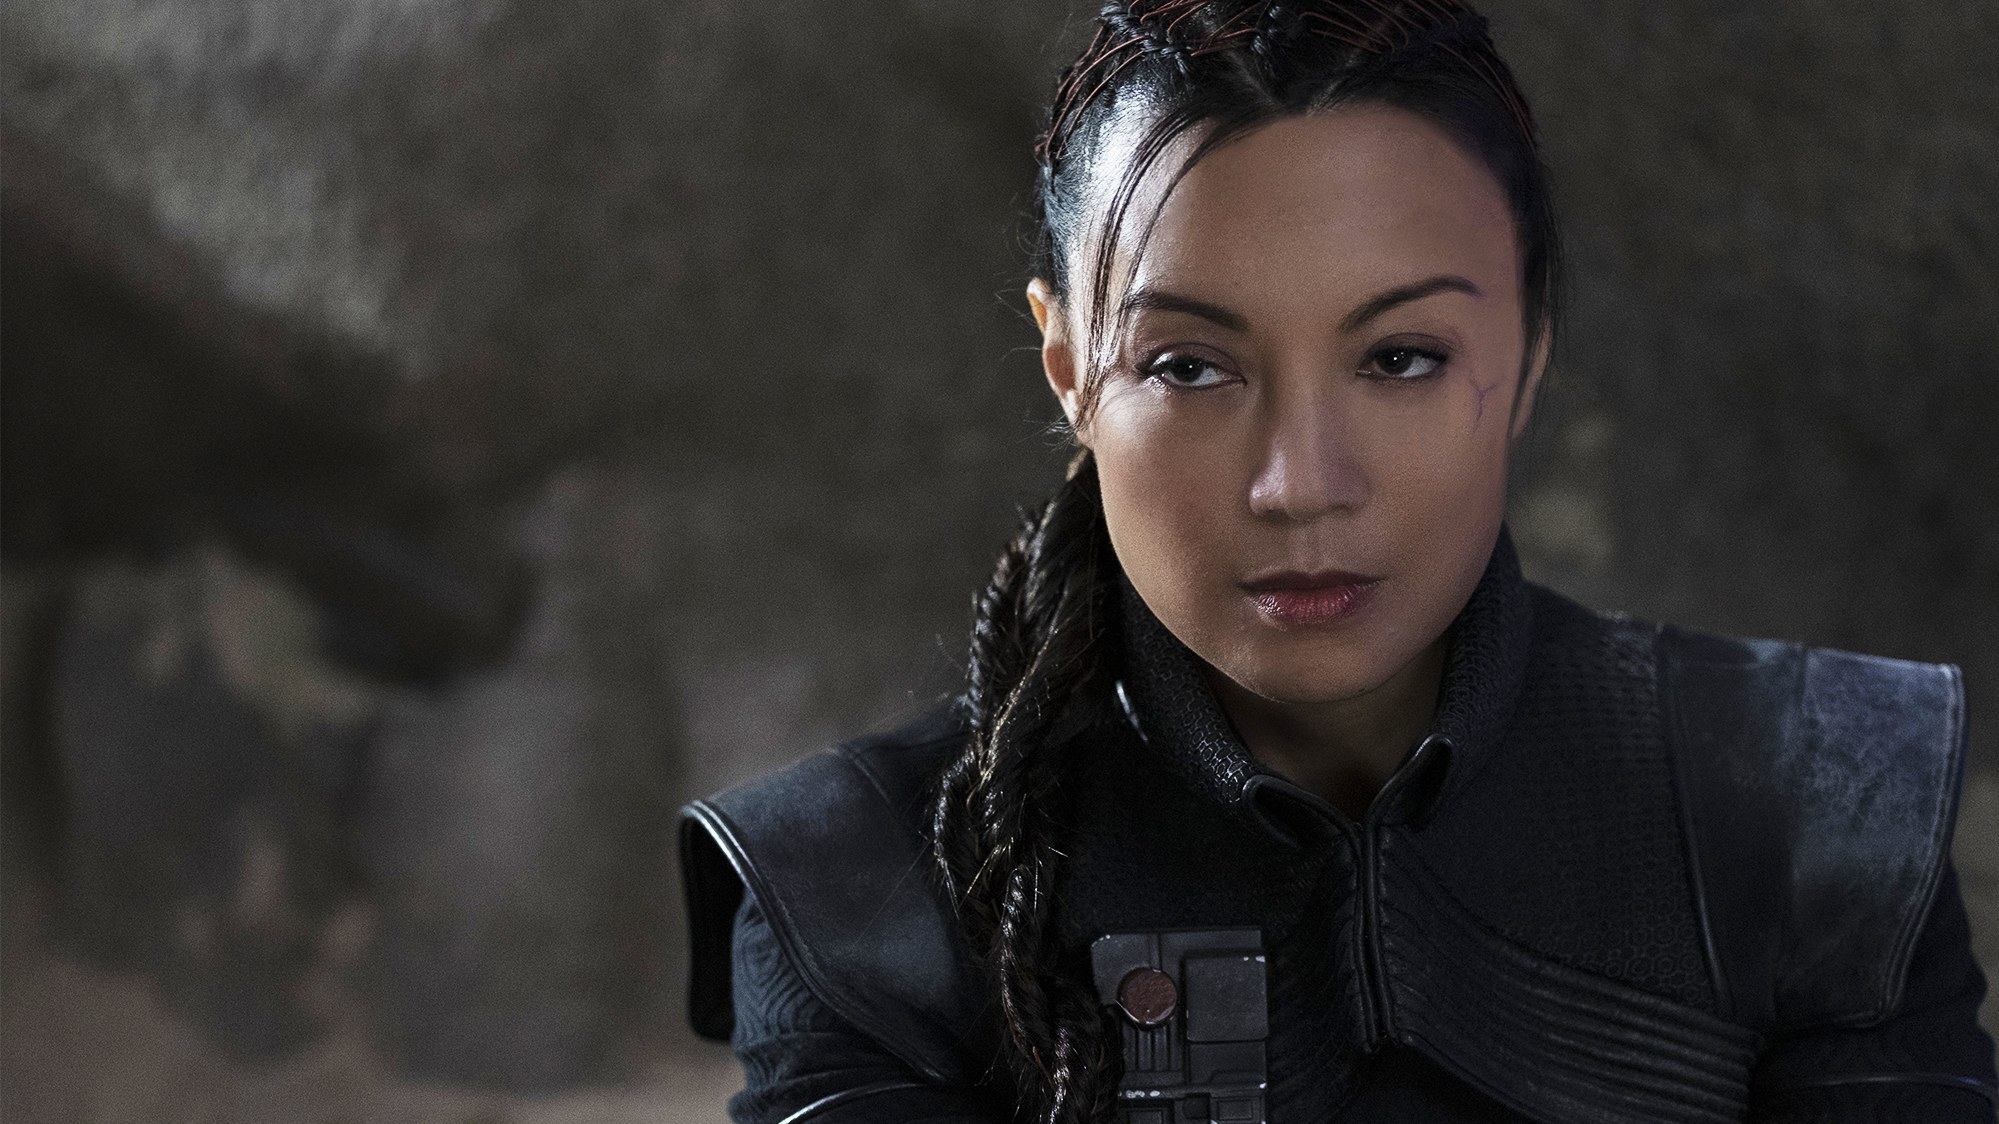 The Mandalorian Gets A New 30-Second Spot Featuring Ming-Na Wen